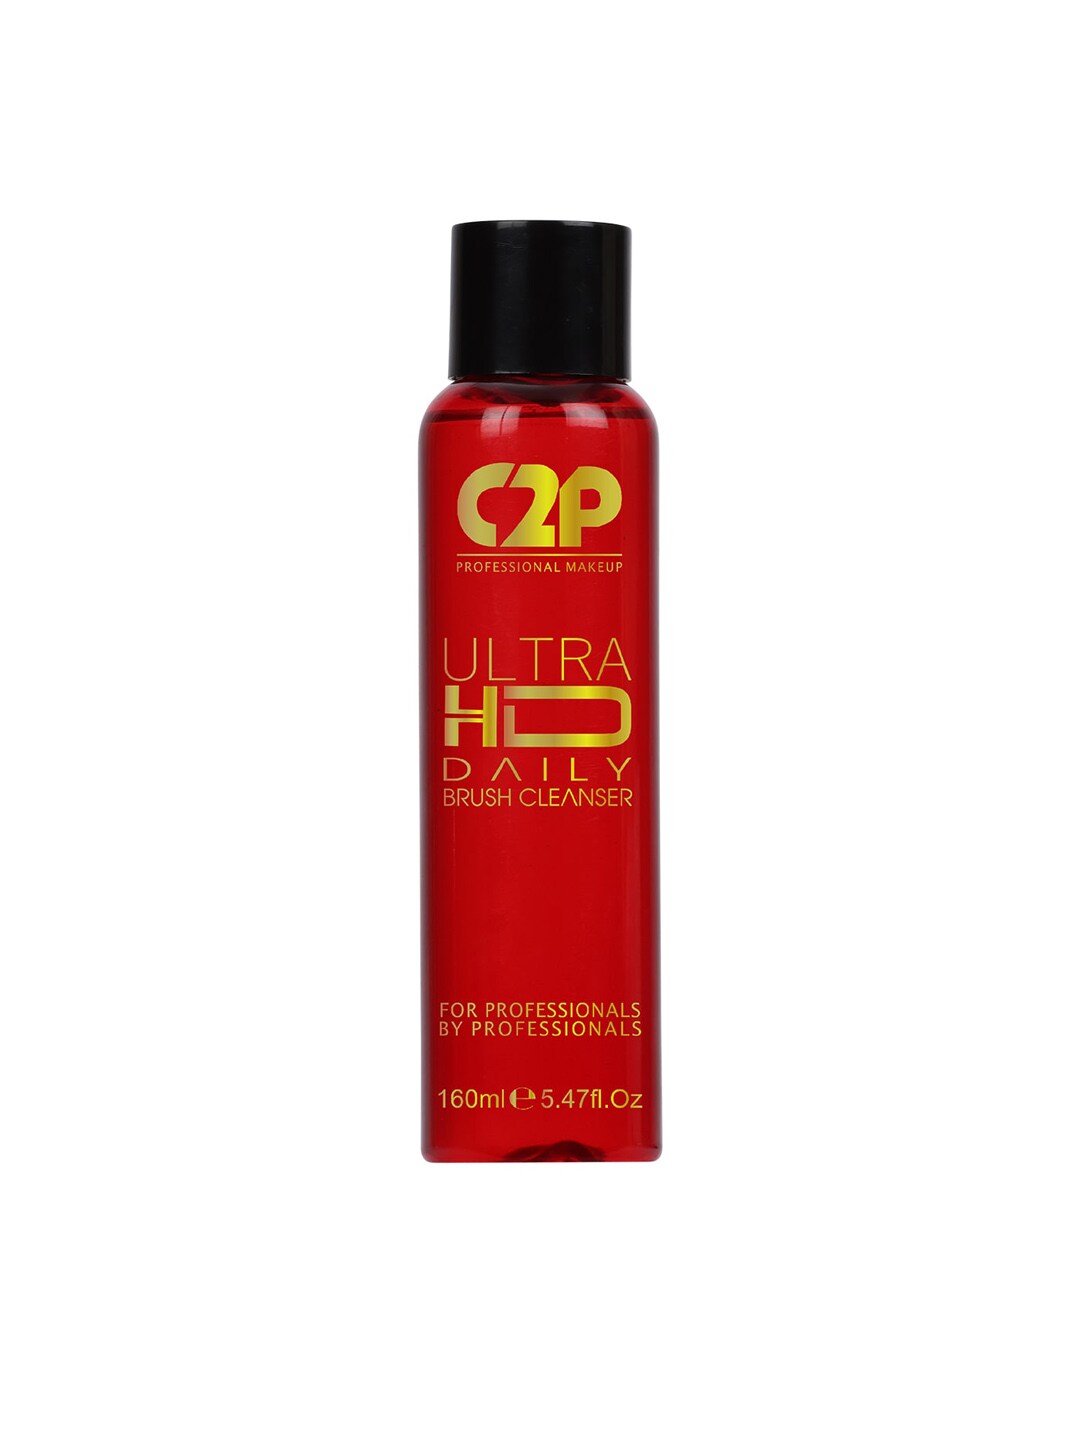 C2P PROFESSIONAL MAKEUP Ultra HD Daily Brush Cleaner 160 ml Price in India